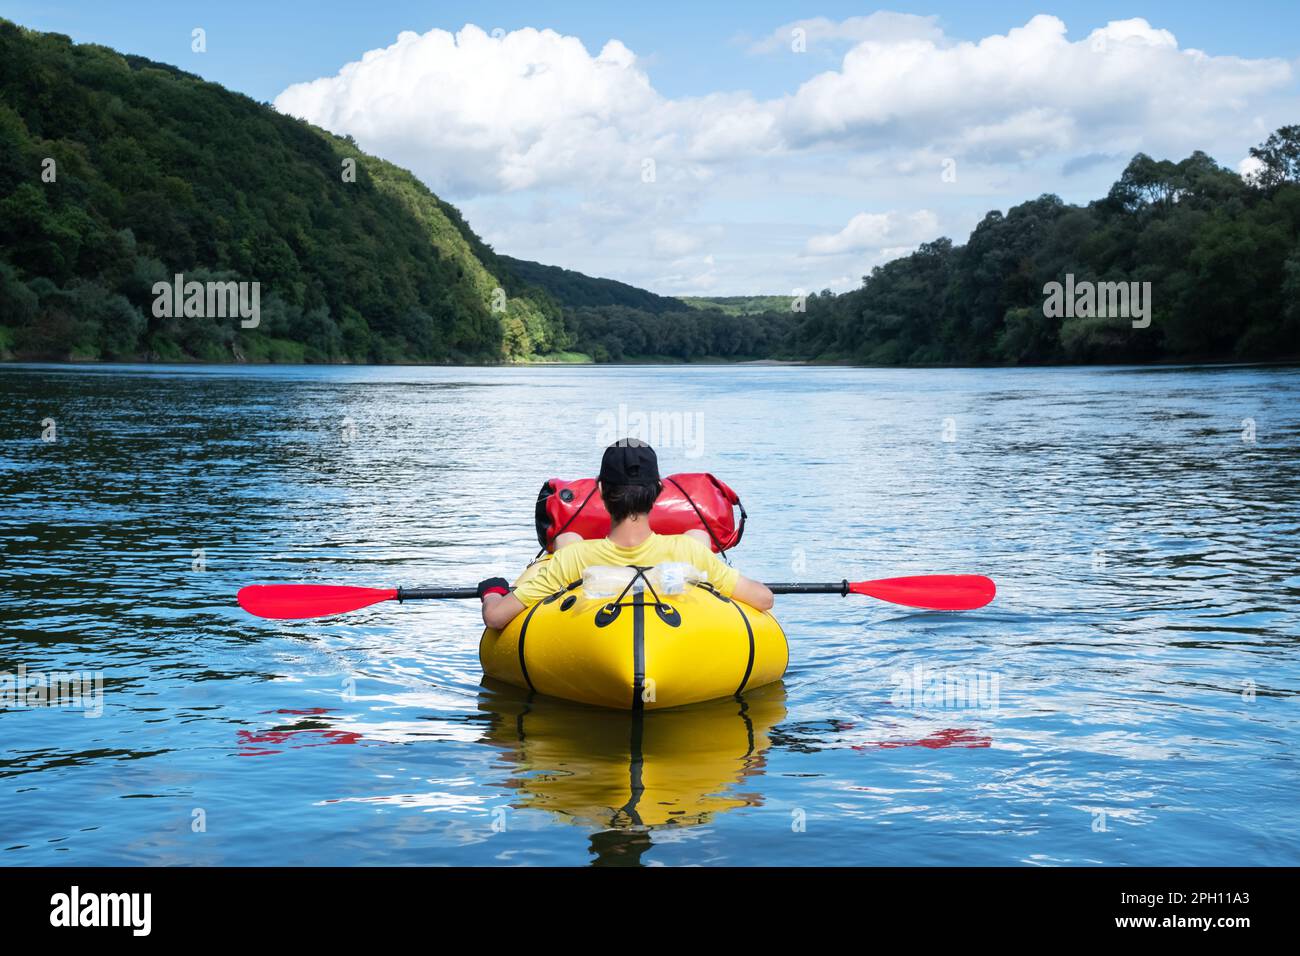 Tourist on yellow packraft boat on sunrise Dnister river in Ukraine. Packrafting. Active lifestile concept Stock Photo